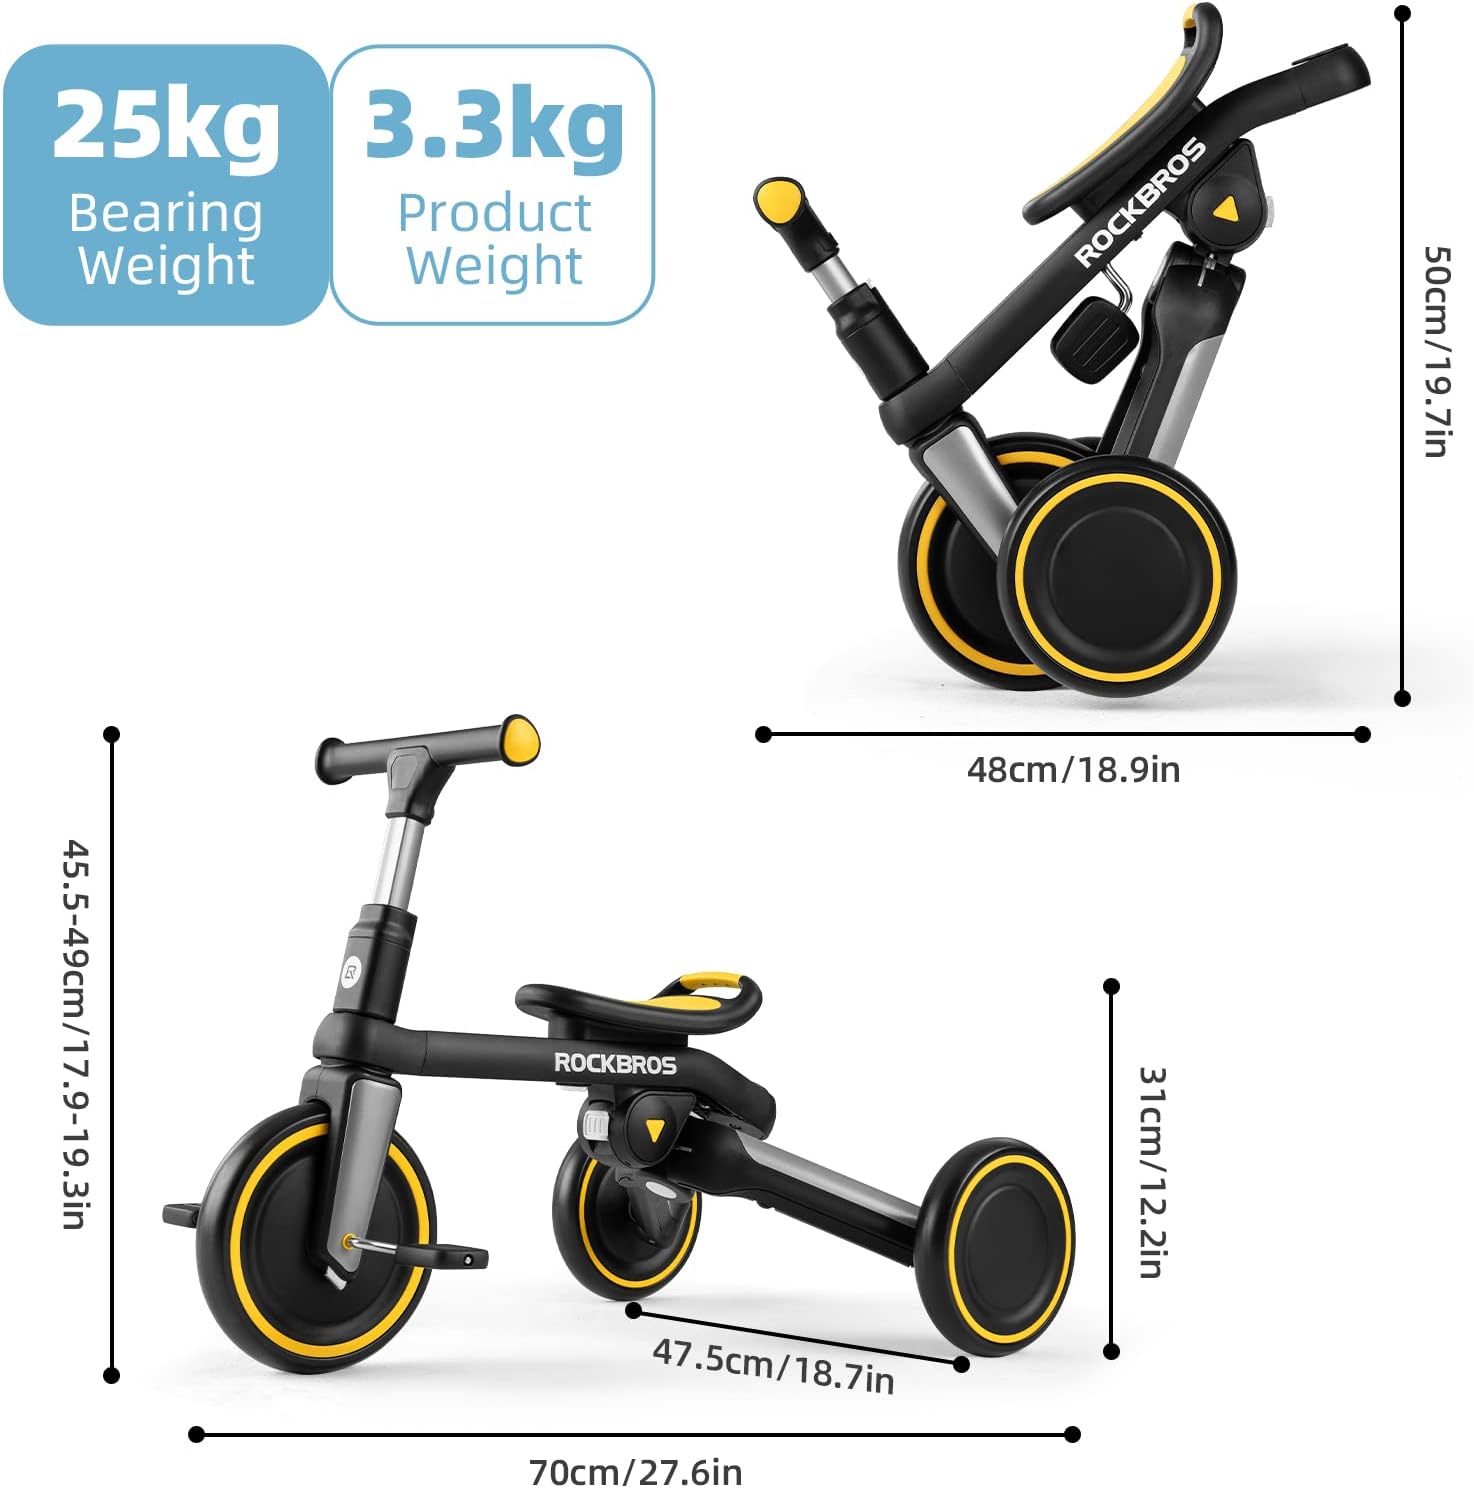 ROCKBROS 3 in 1 Kids Tricycles Adjustable Seat Height&Removable Pedals